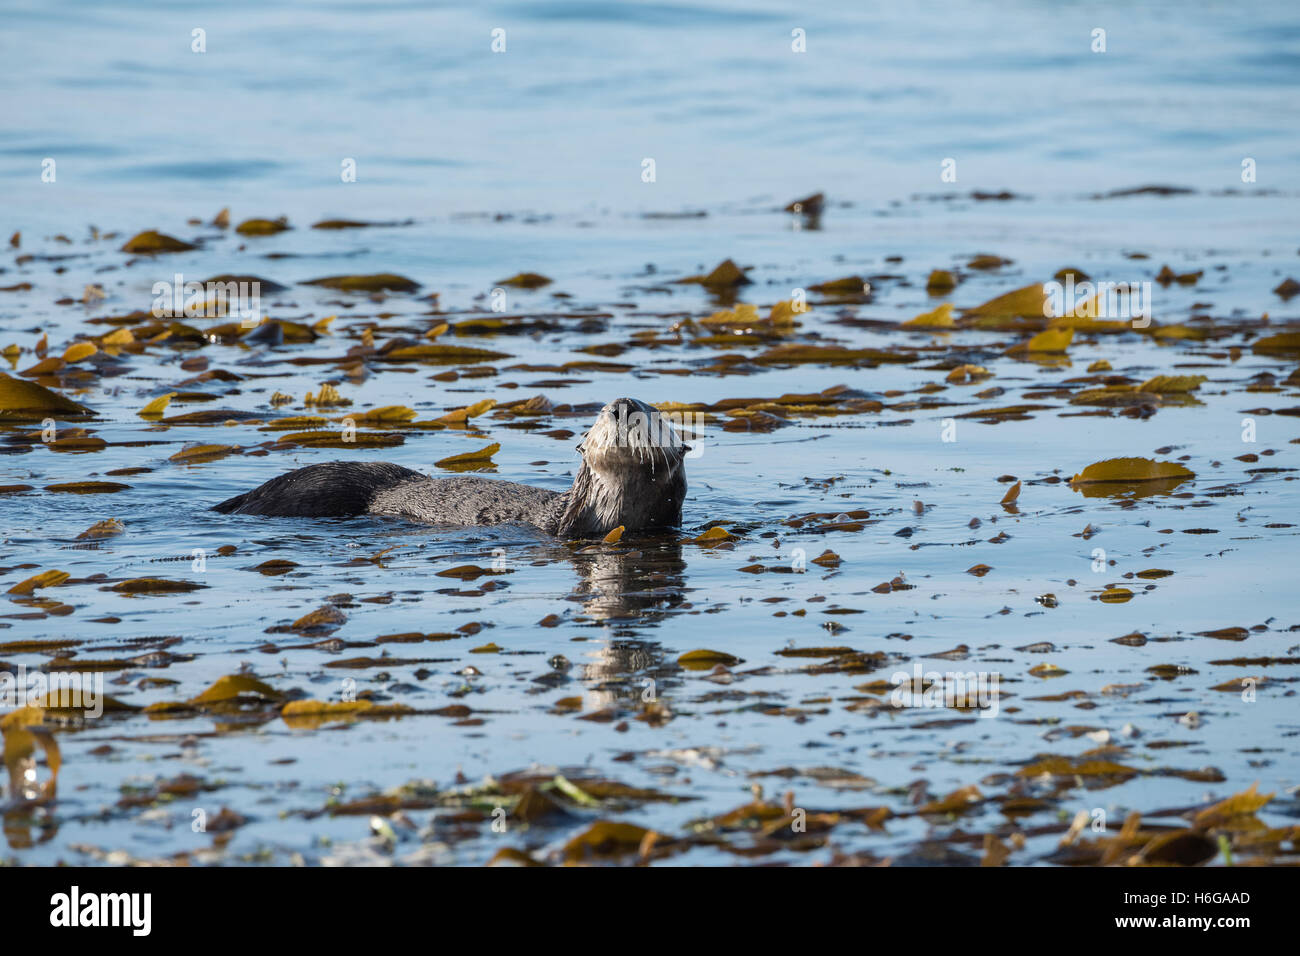 California sea otter, Enhydra lutris nereis, male spyhops and sniffs the air to locate nearby female, Morro Bay, California, USA Stock Photo